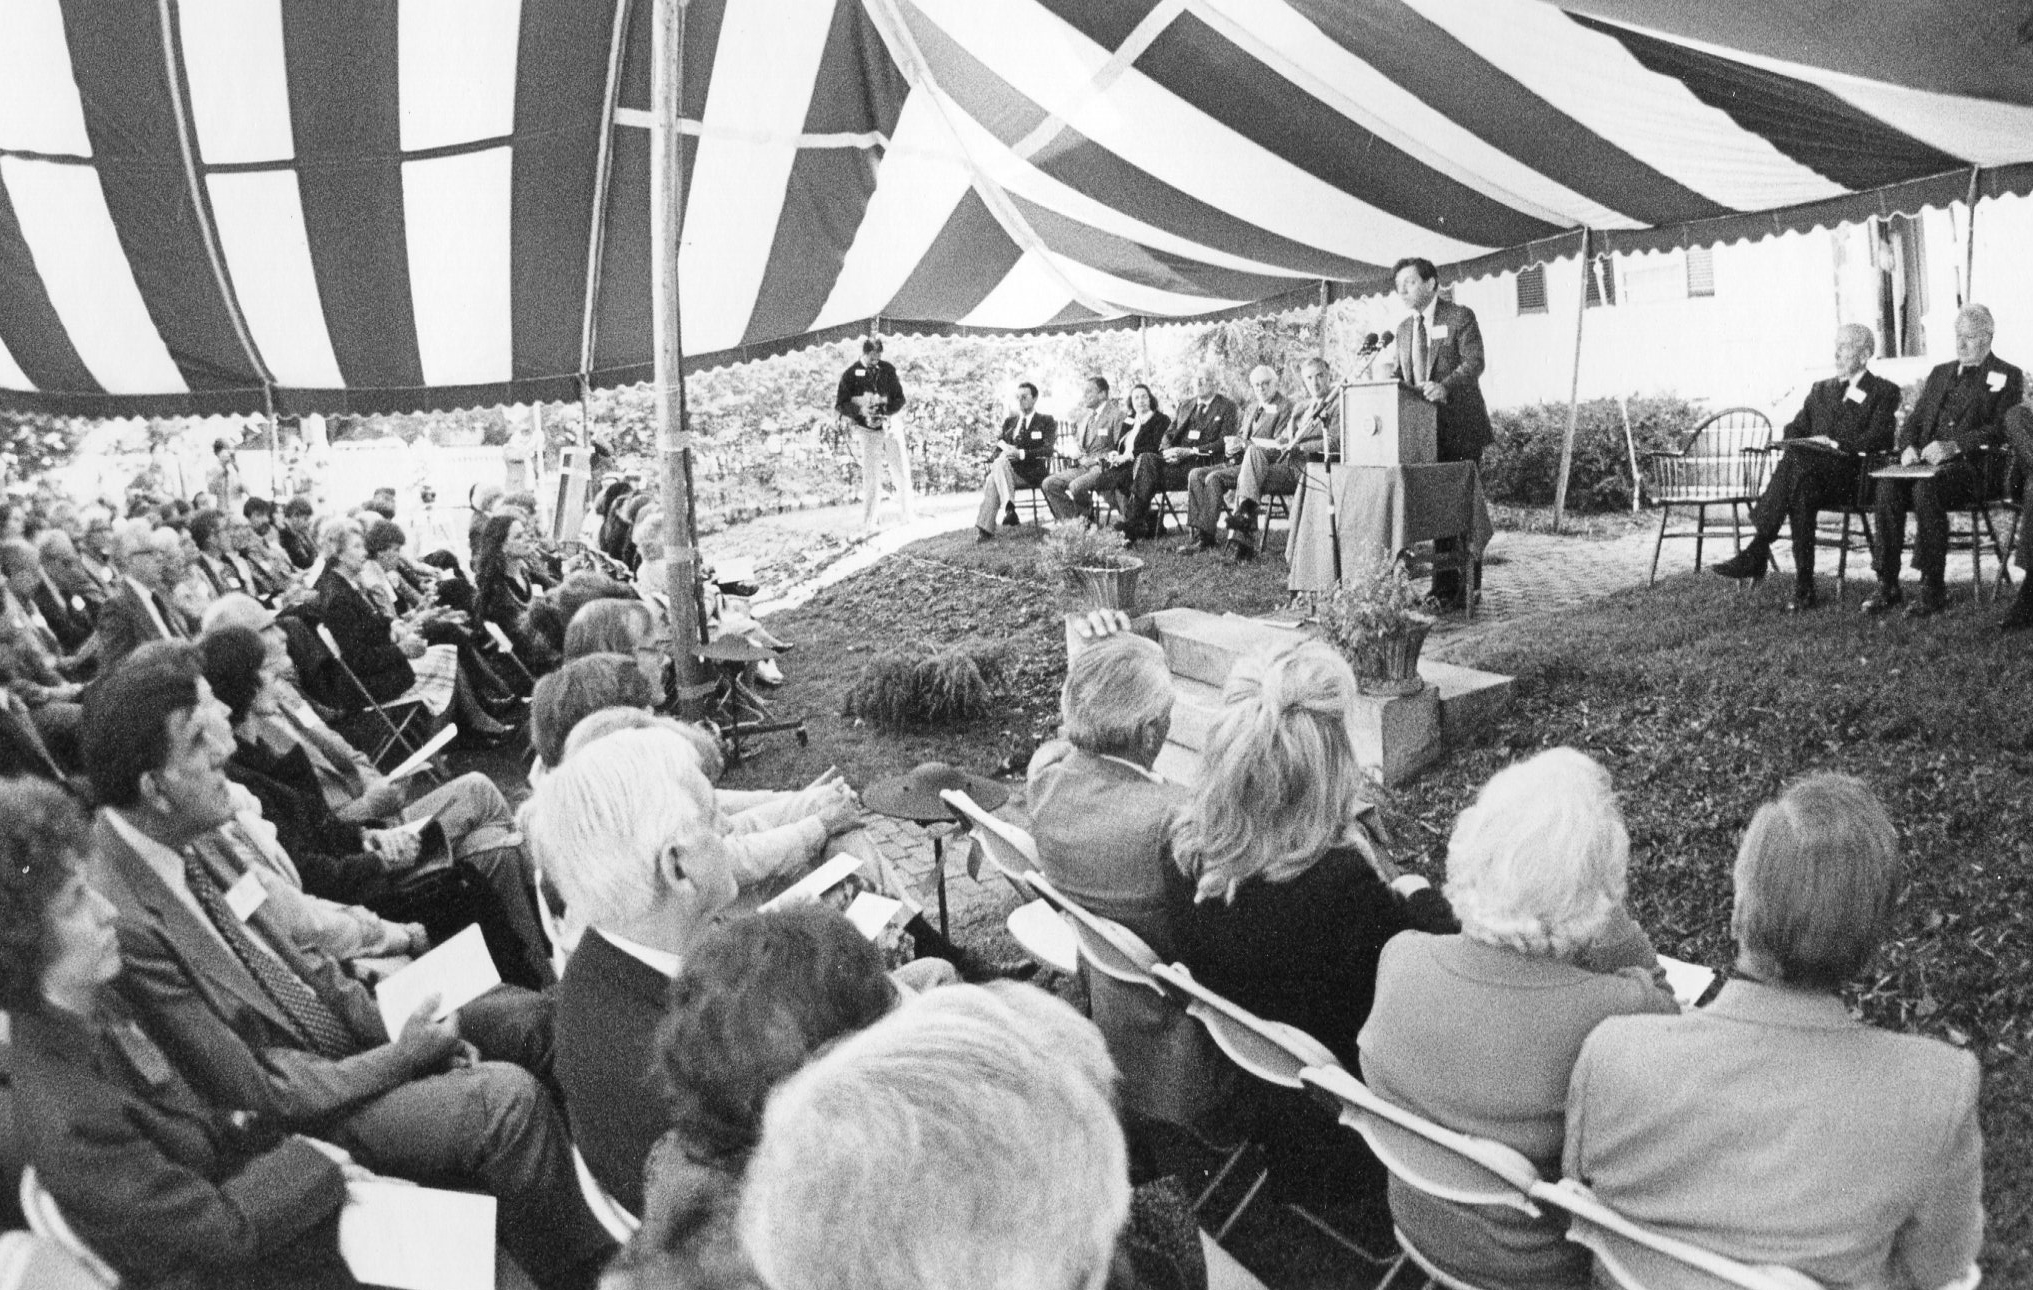 Curator James C. Thomson, Jr. welcomes guests to the dedication ceremony for Walter Lippmann House on September 23, 1979